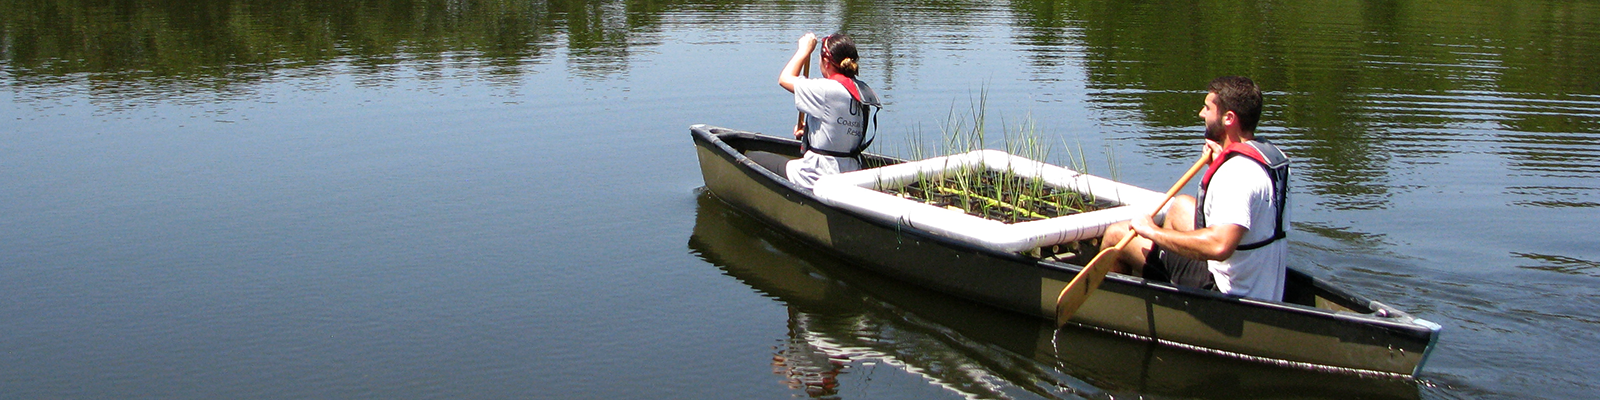 Students in a canoe doing research